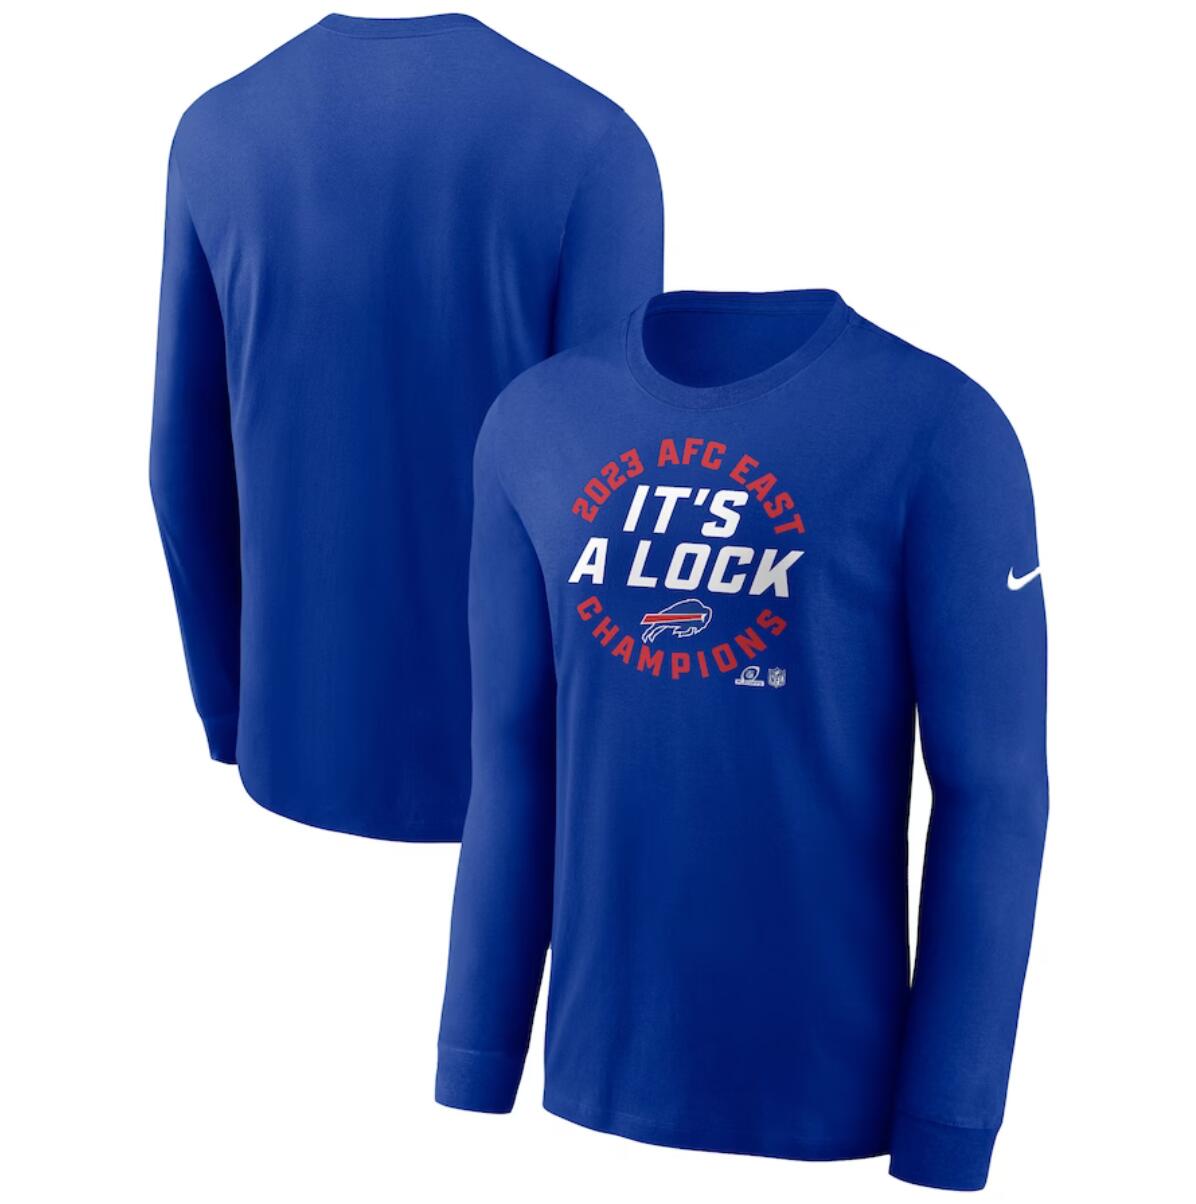 Men's Buffalo Bills Royal 2023 AFC East Division Champions Locker Room Trophy Collection Long Sleeve T-Shirt